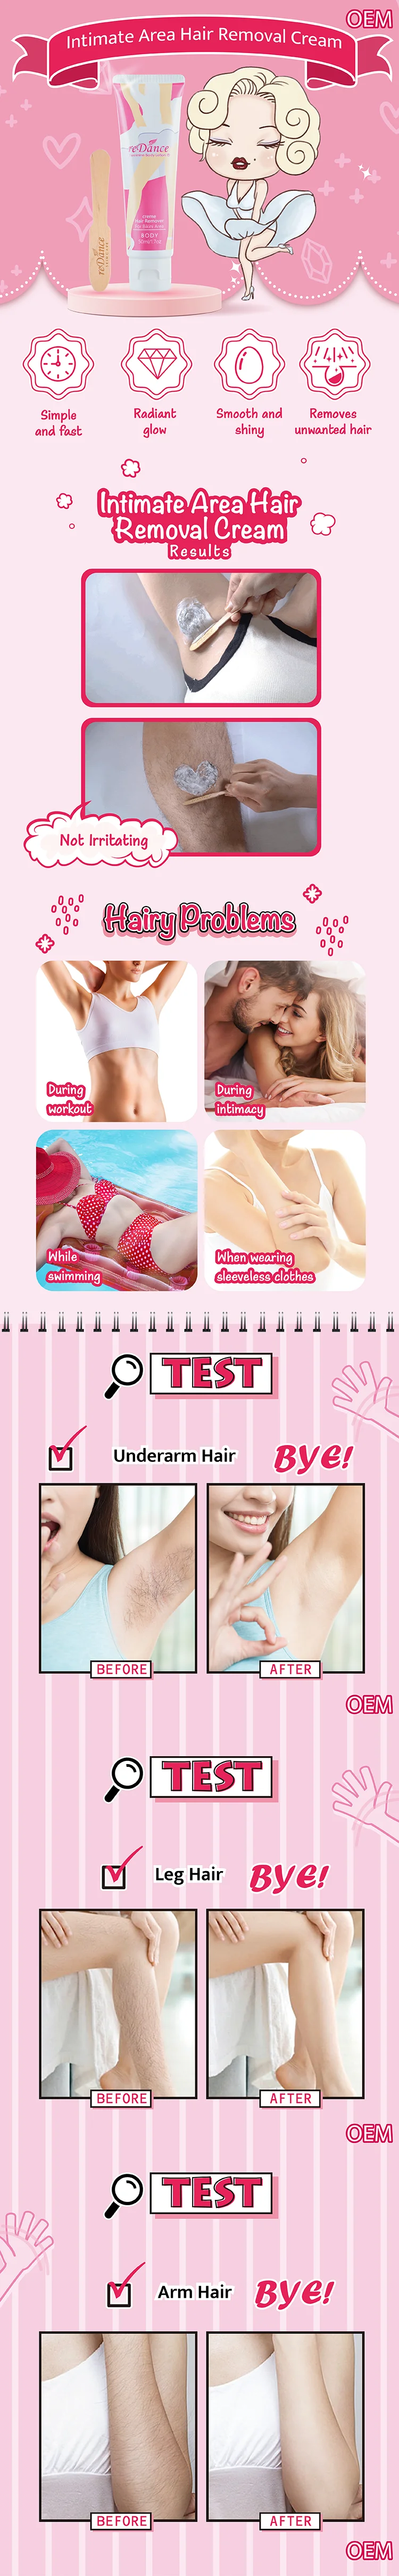 Best Selling Quality Cruelty-free Female Genital Removal Hair Remover Cream  Name Hair Remove Cream - Buy Hair Removal Cream Cruelty-free,Female Genital  Hair Removal,Hair Remover Cream Name Product on 